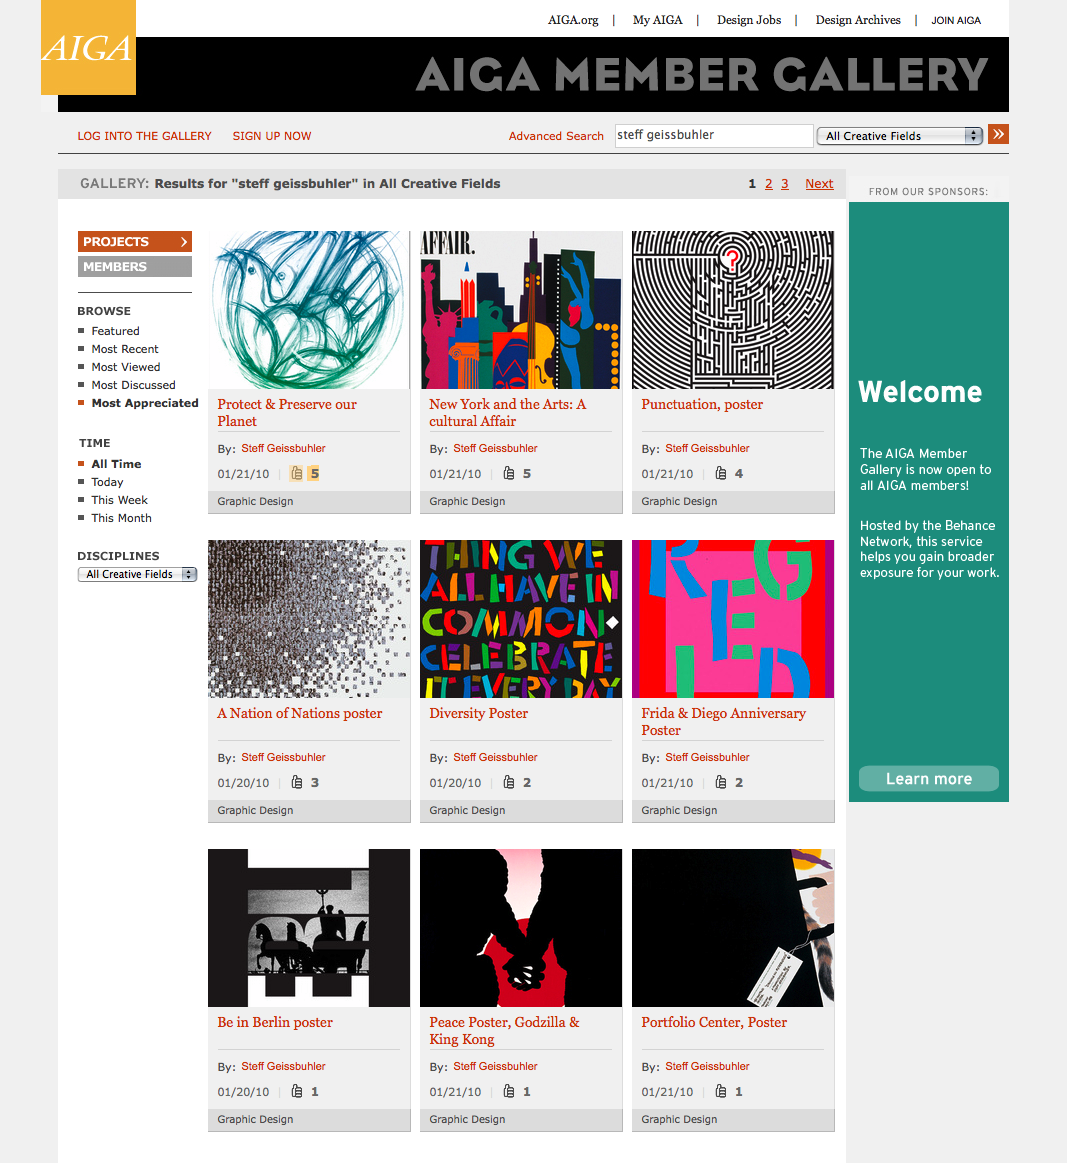 Project image 2 for Interactive Member Gallery, American Institute of Graphic Arts